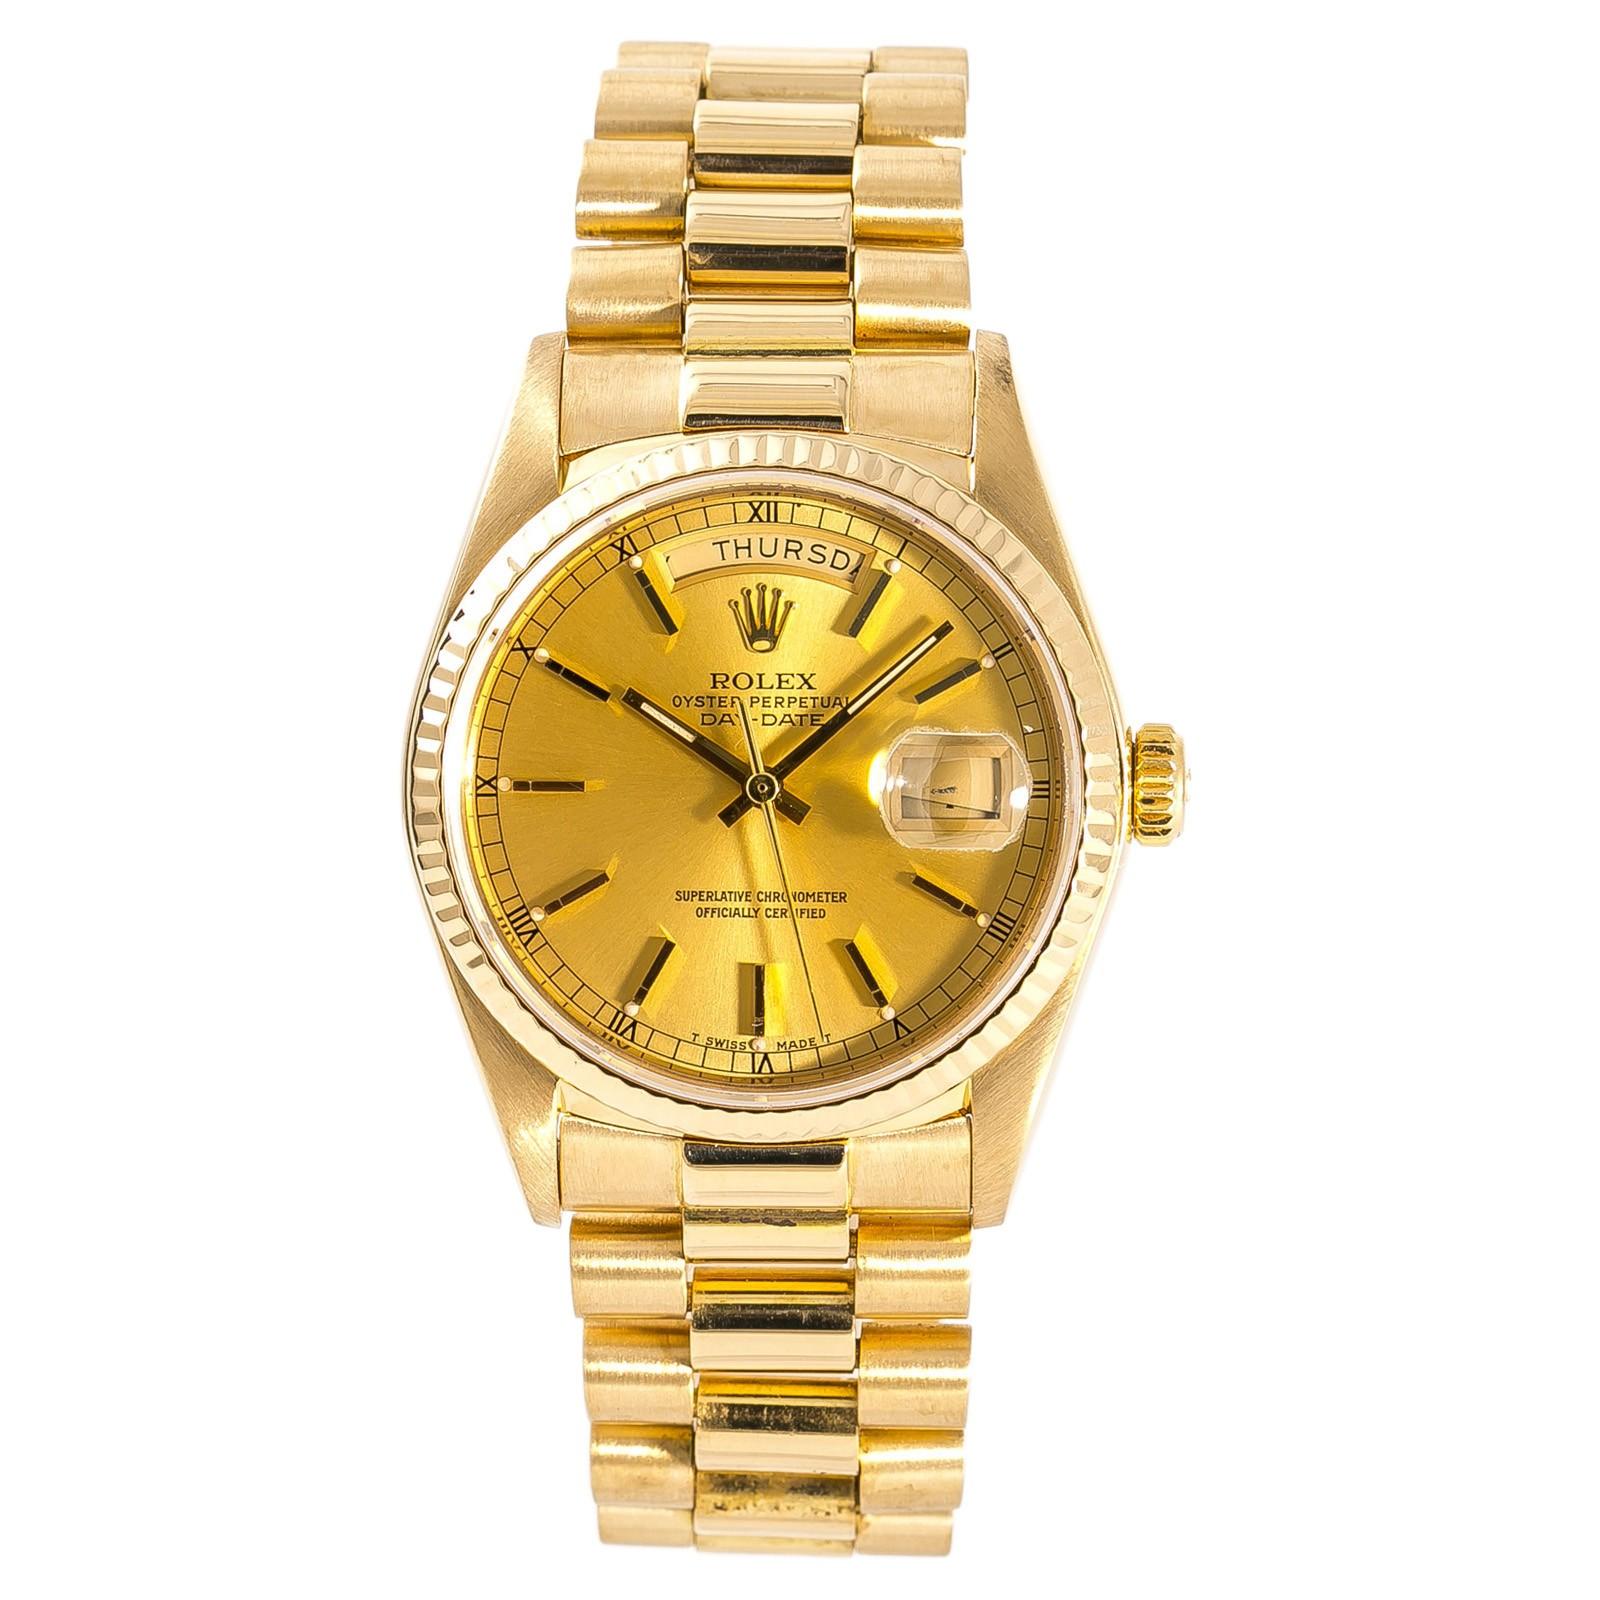 Rolex Day-Date 18038, Champagne Dial Certified Authentic For Sale